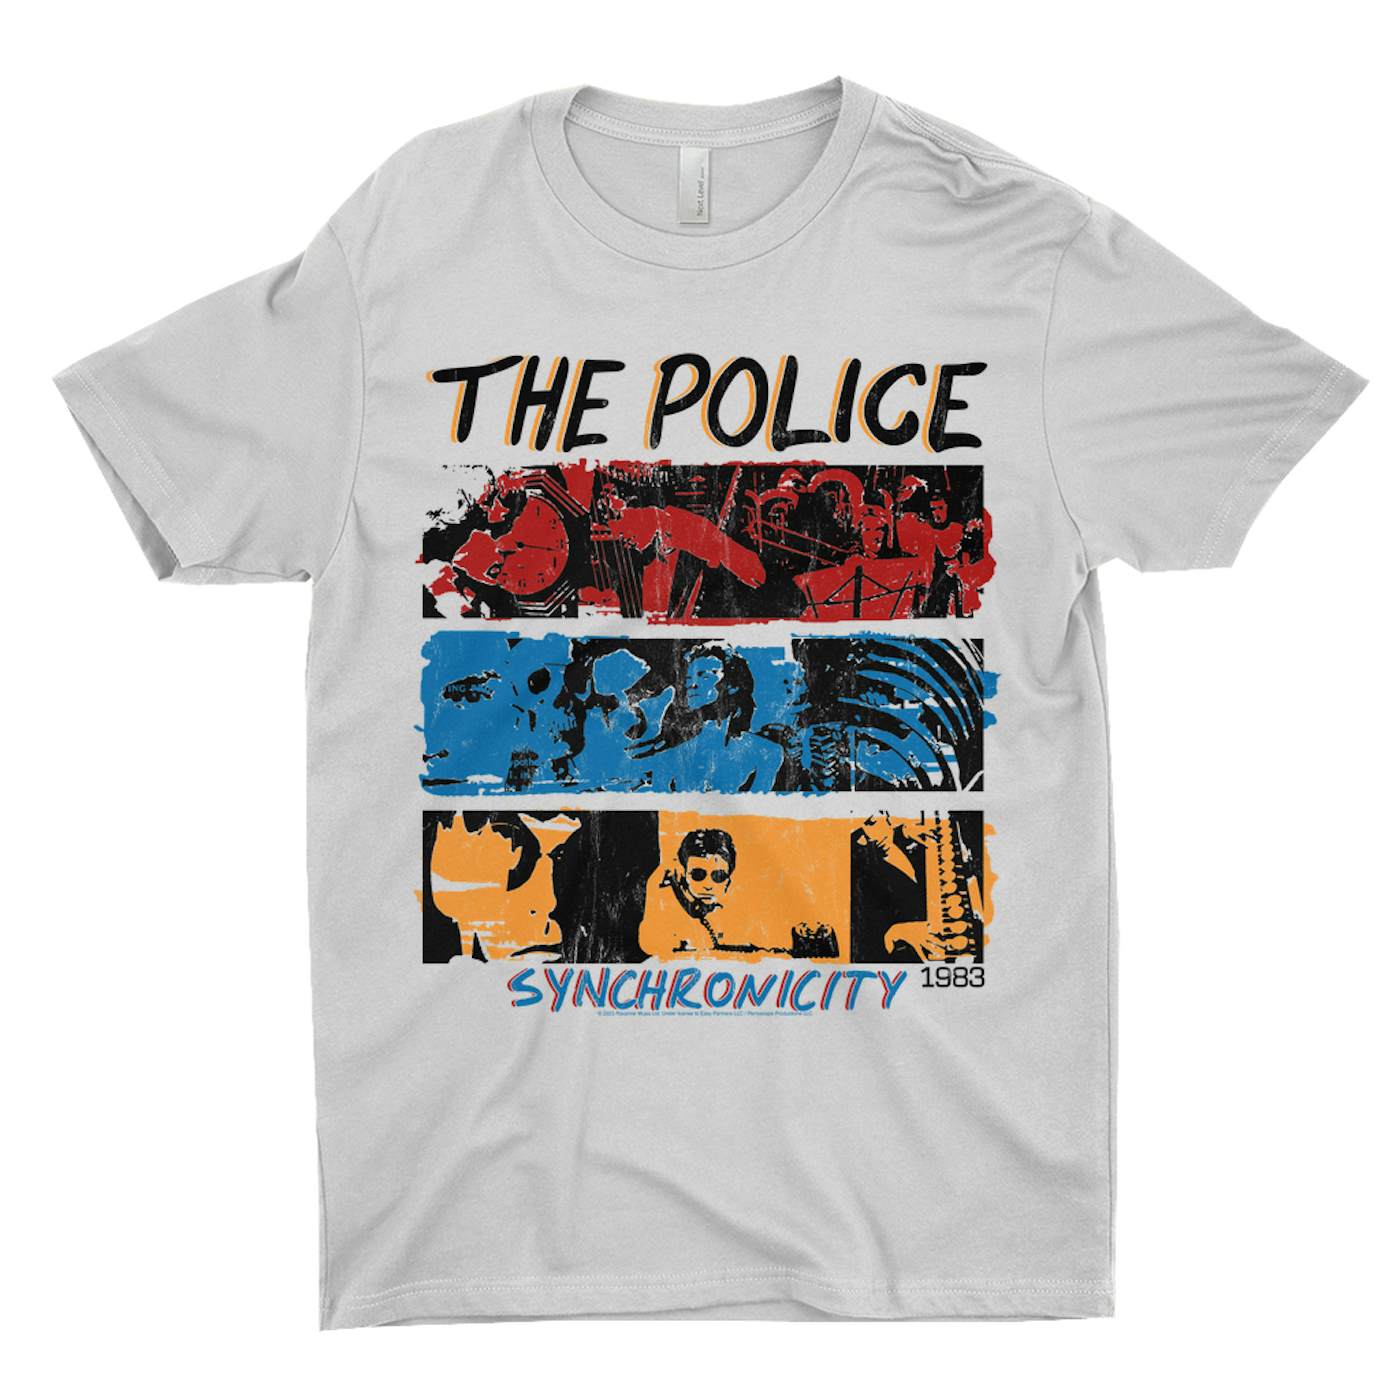 The Police T-Shirt | 1983 Synchronicity Tour Distressed (Merchbar Exclusive) The Police Shirt